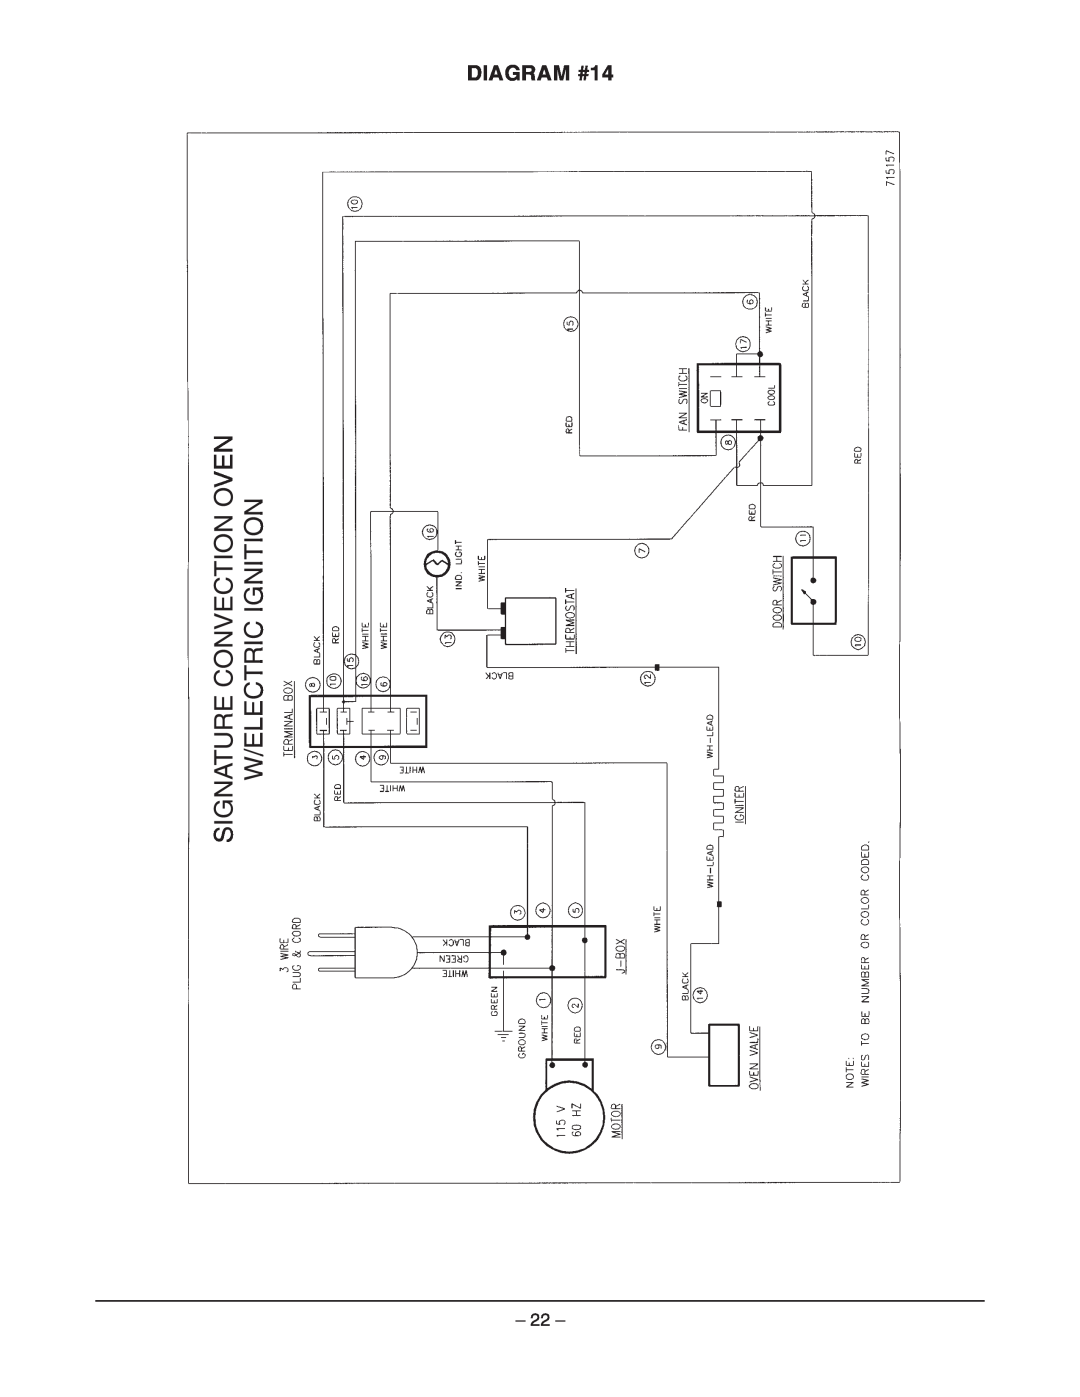 Vulcan-Hart ML-044938, ML-044937, ML-044936, ML-044962, ML-044969 DIAGRAM #14, Signature Convection Oven, W/Electric Ignition 